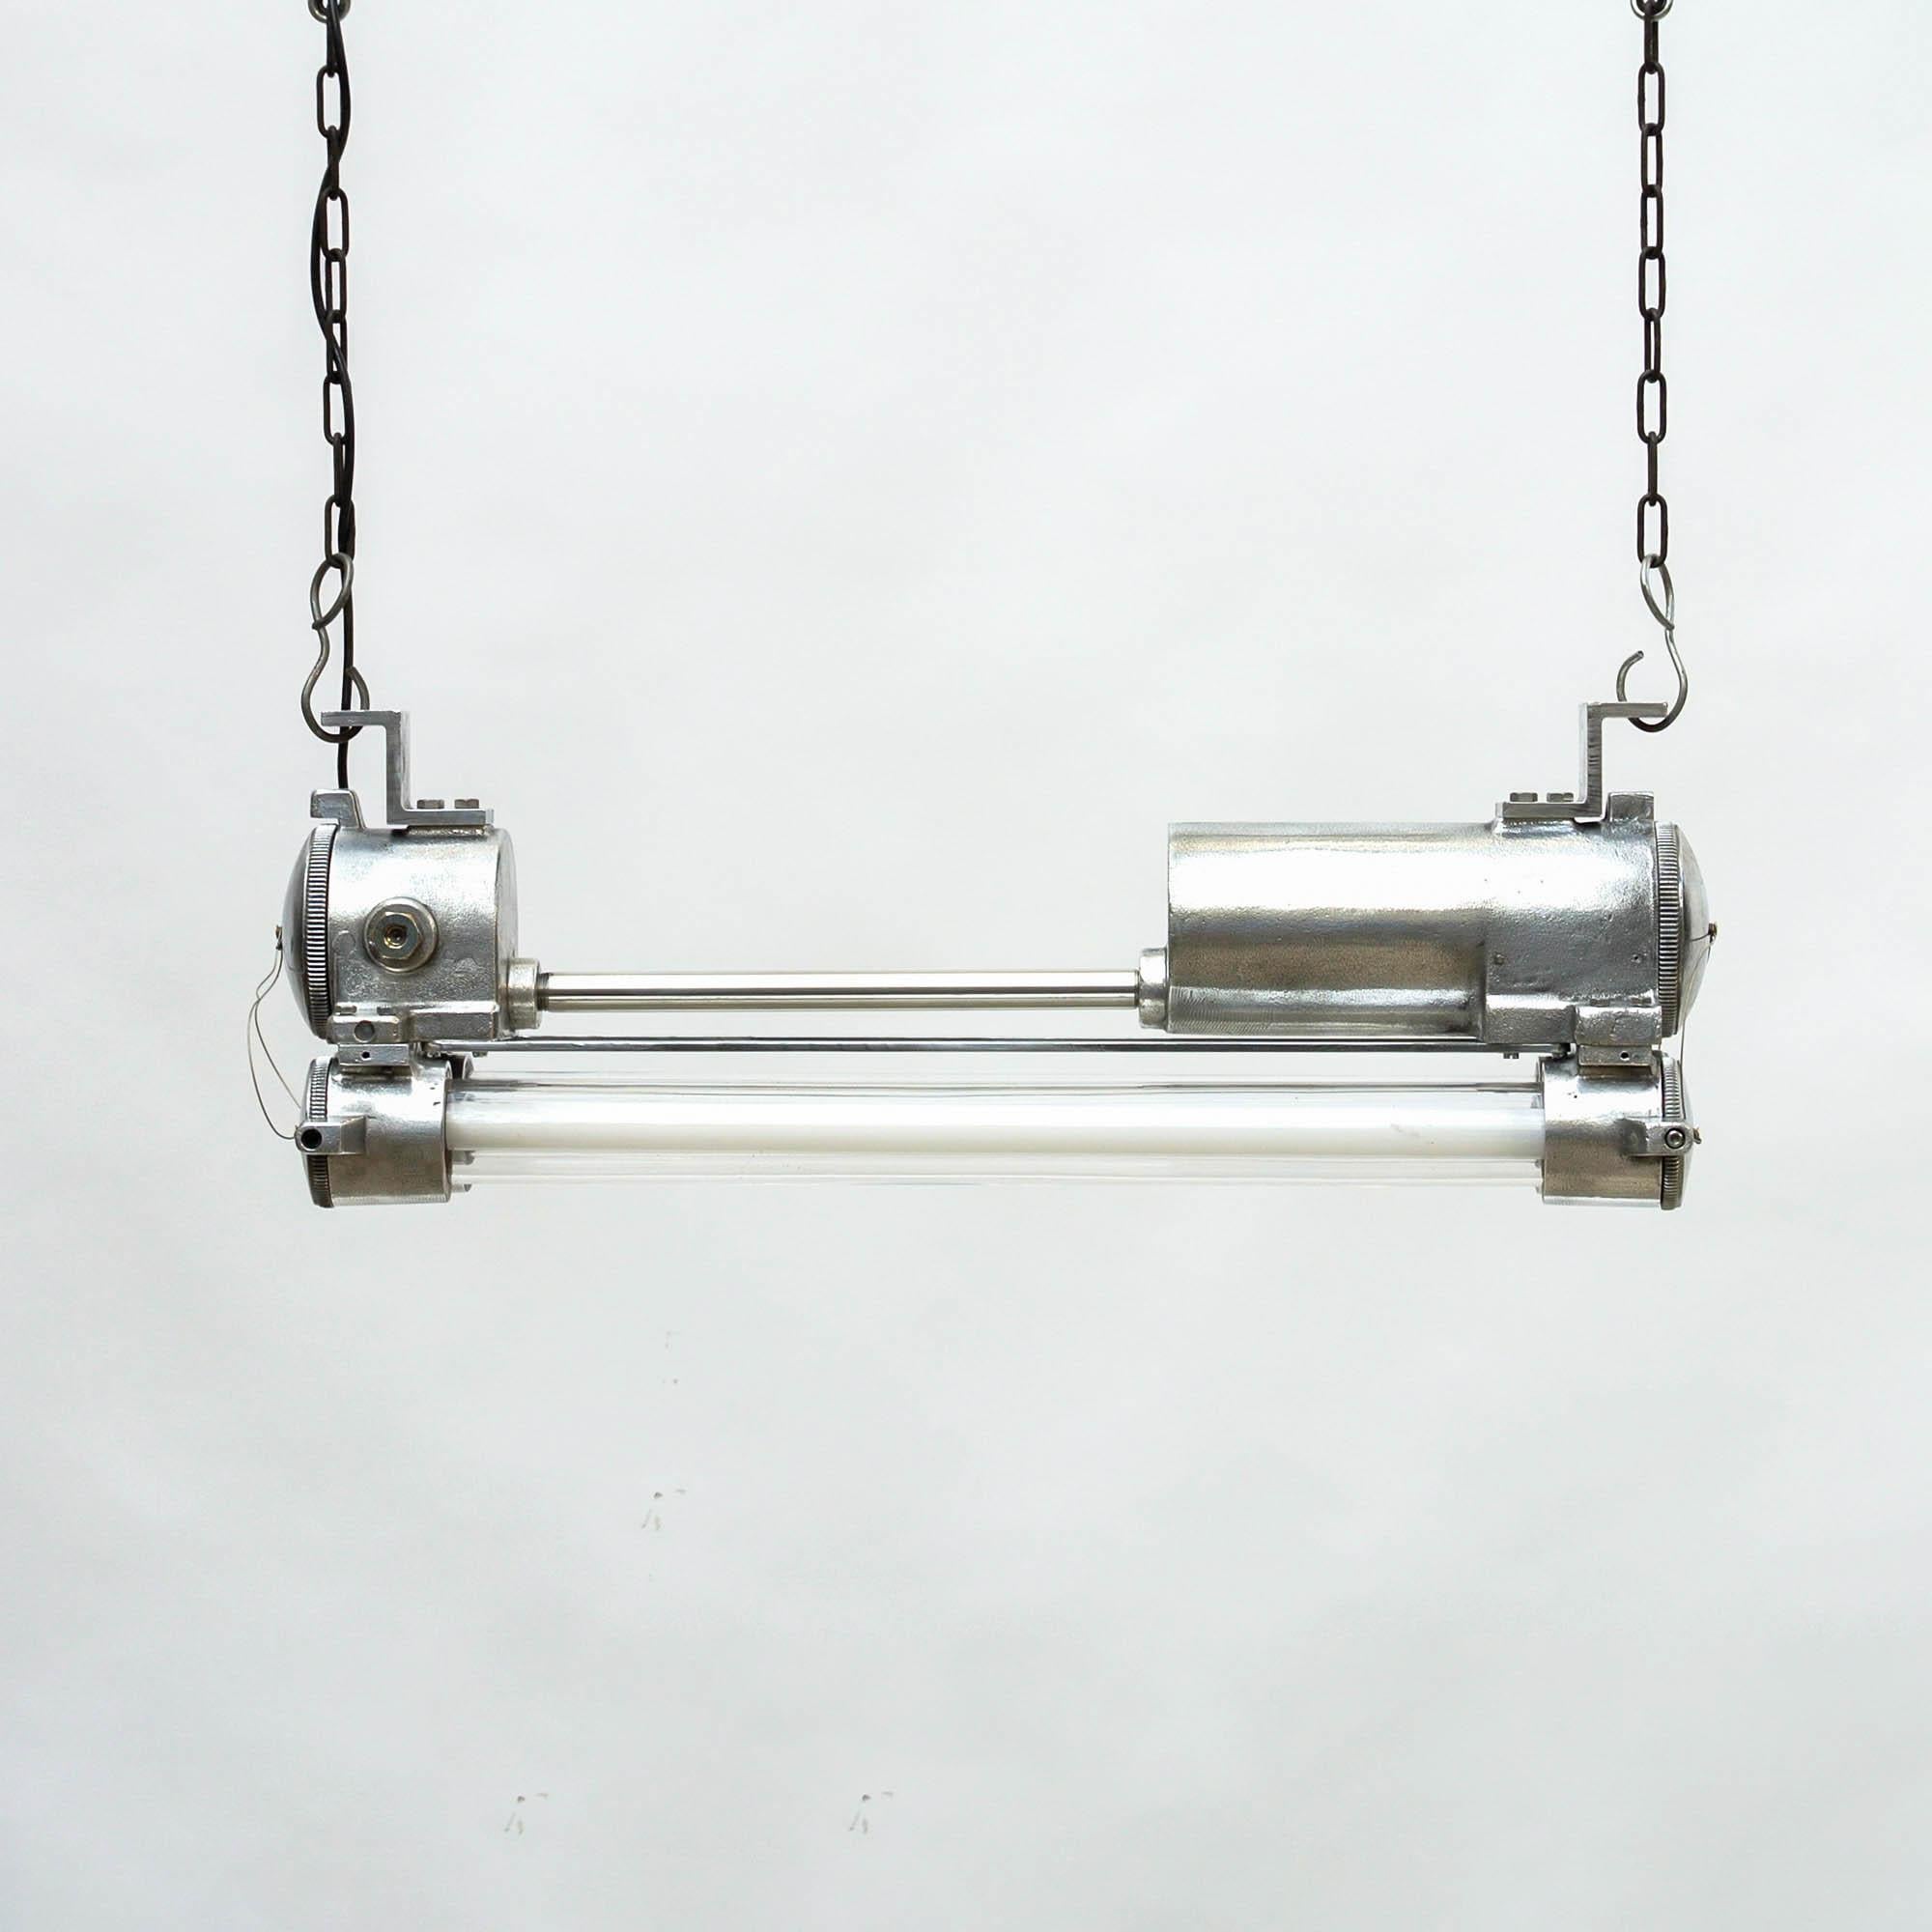 Cast aluminium fluorescent explosion-proof ceiling light, originally used in hazardous area. Fully restored: stripped, brushed polished and rewired with new electronic ballast (lighter) and fluorescent tubes commercially available (T8 2700K type,